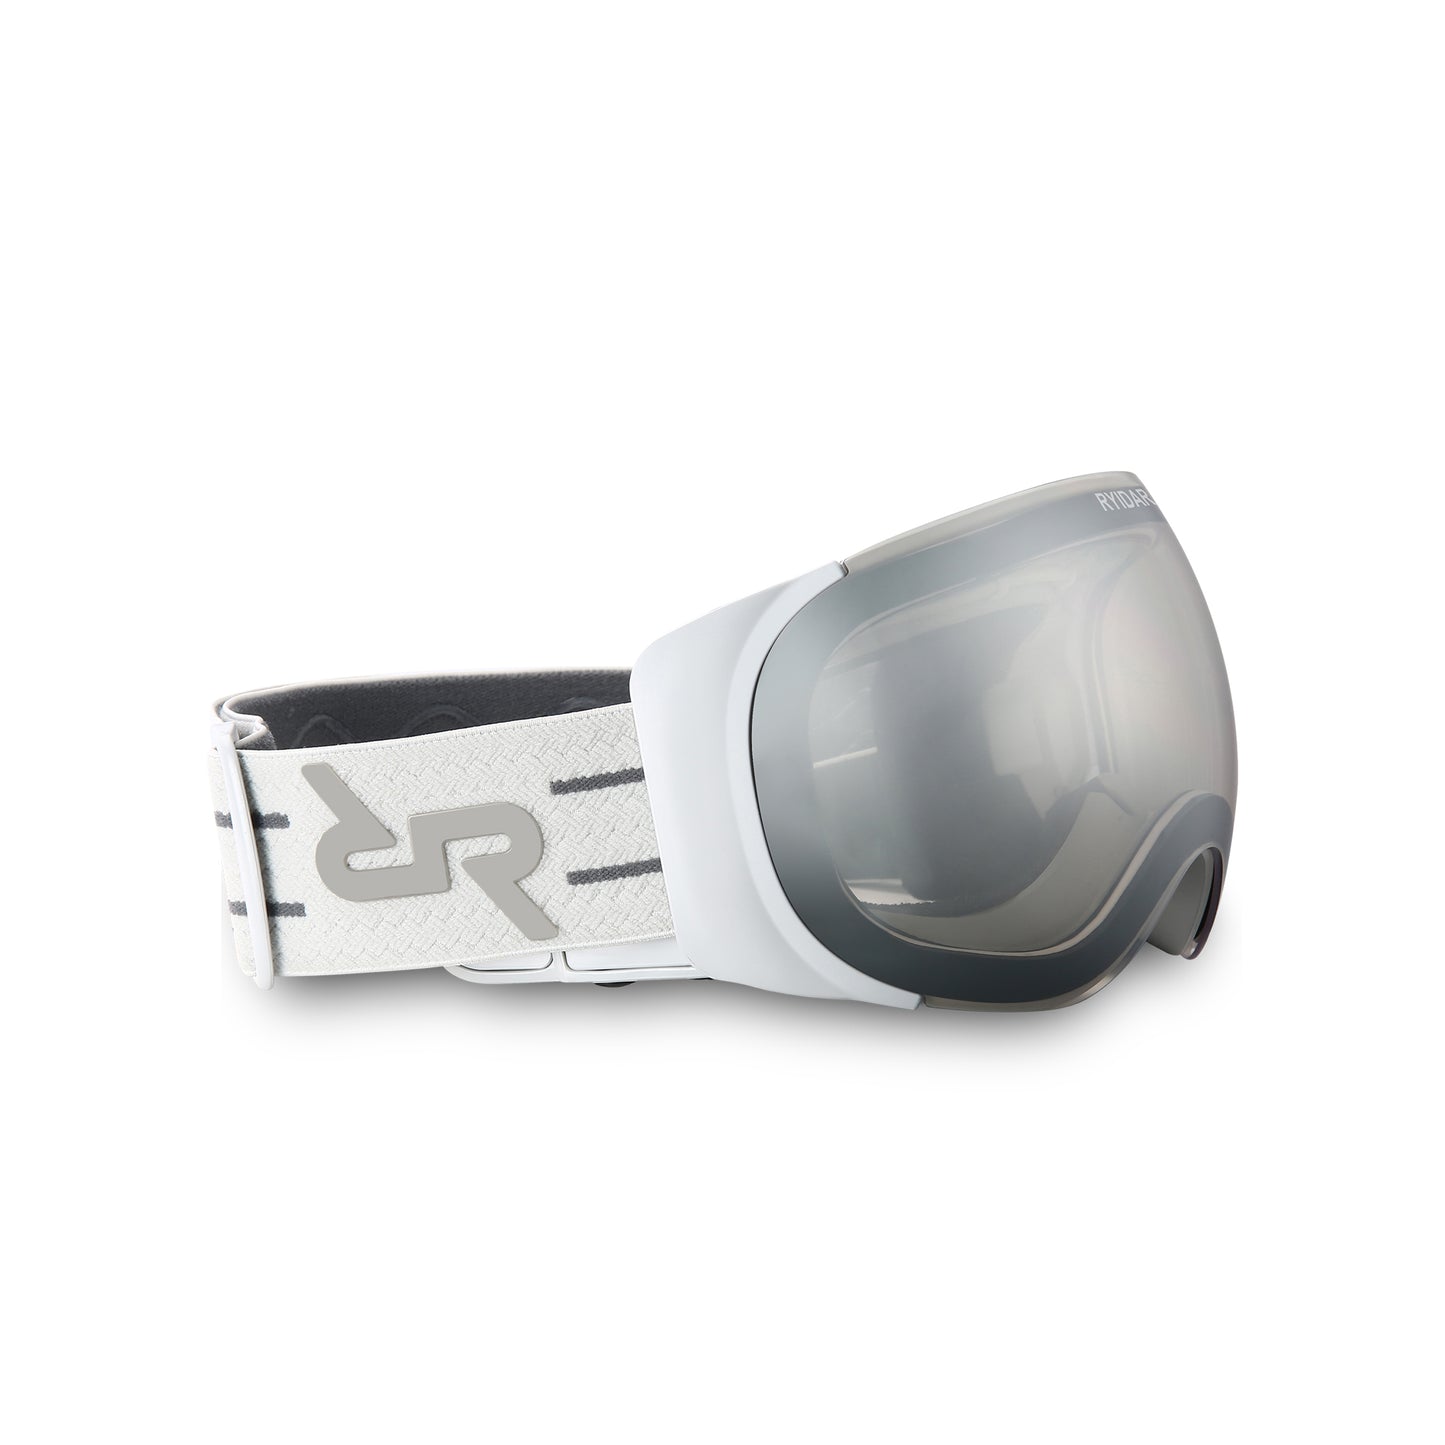 LinkLens Pro 2 Audio Snow Goggles Standard Fit